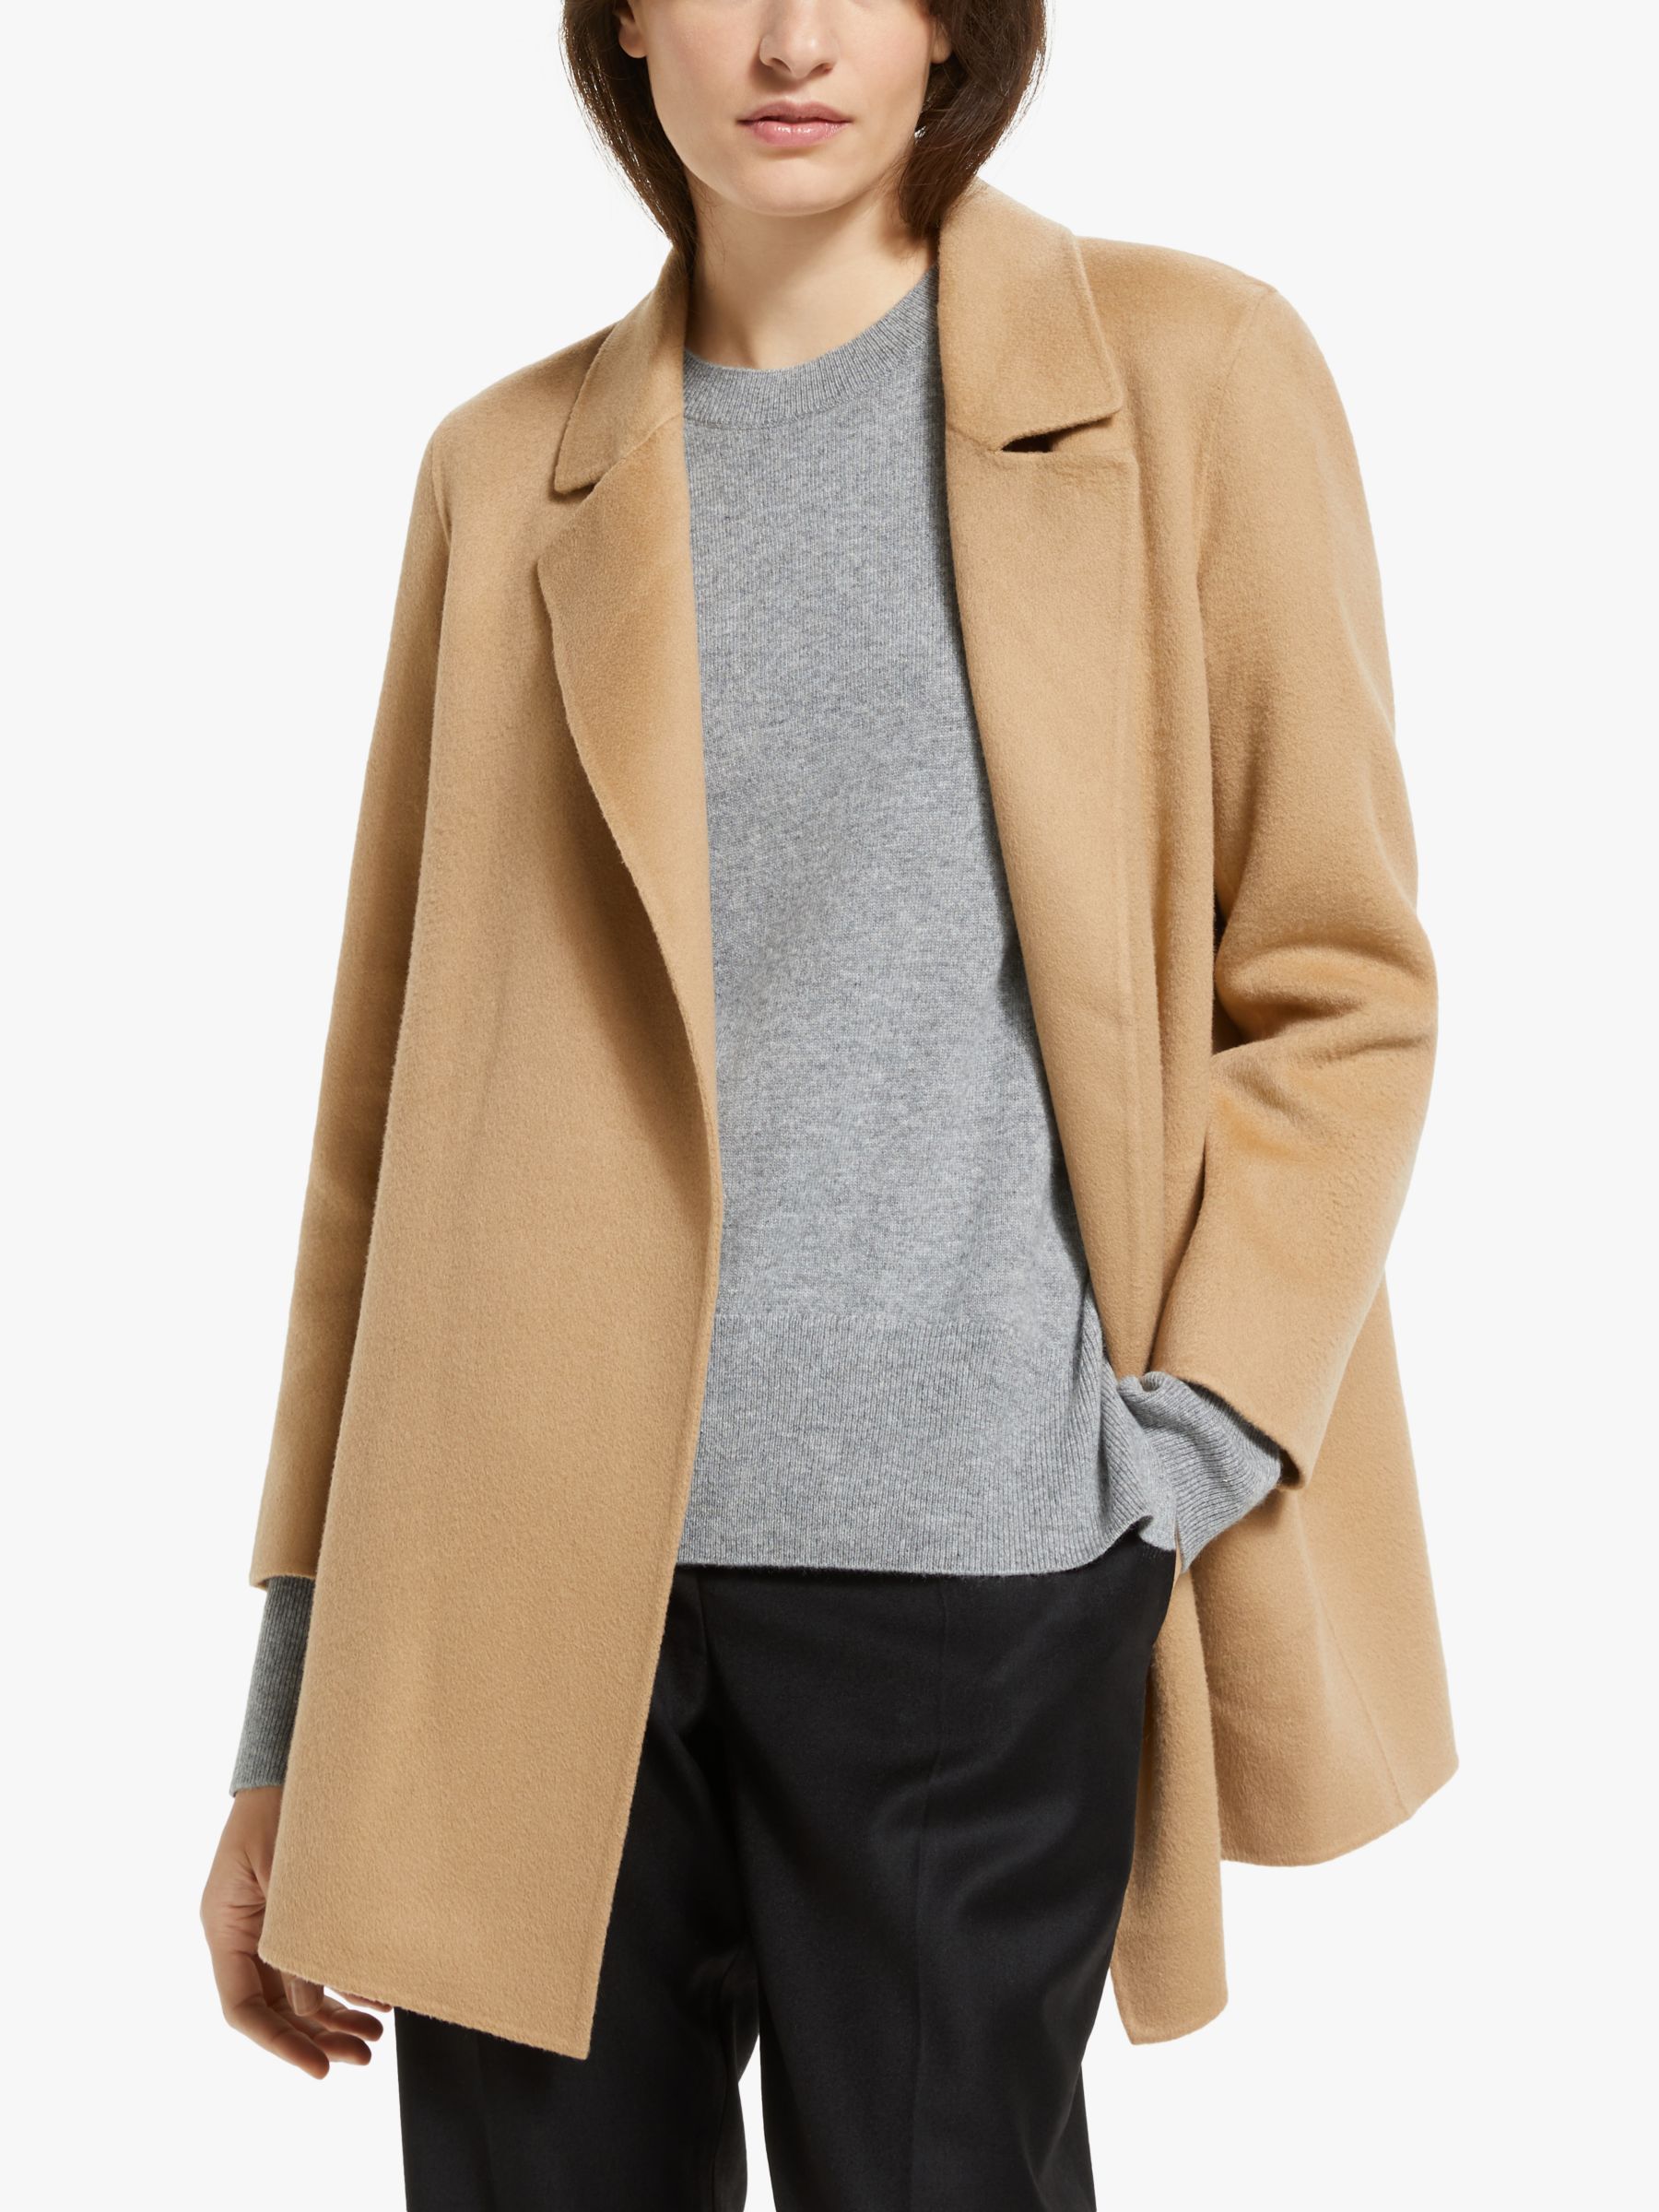 Theory Clairene Double-Face Wool / Cashmere Jacket, Palomino